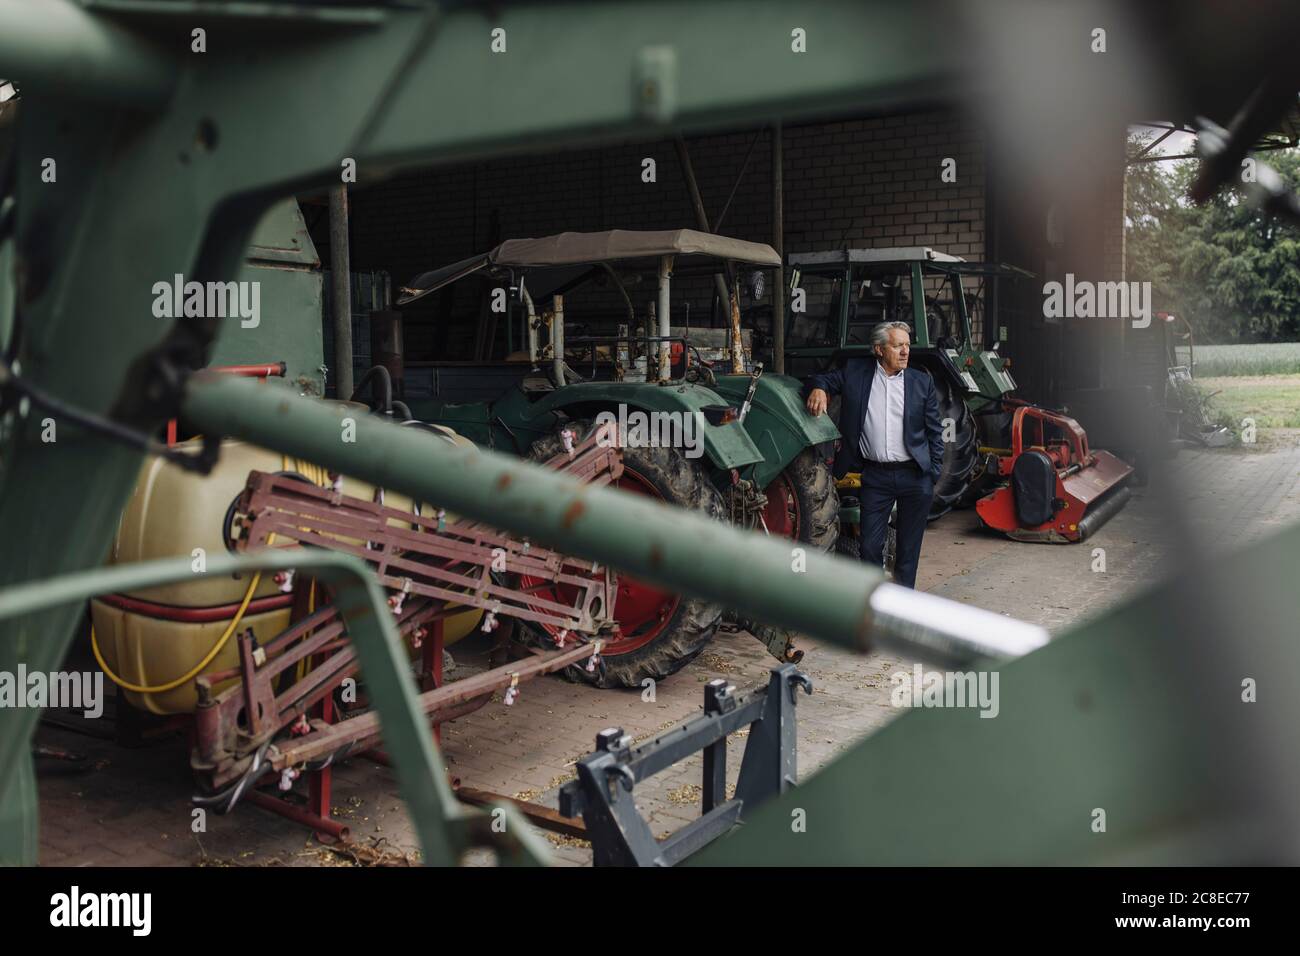 Senior businessman on a farm with tractor in barn Stock Photo